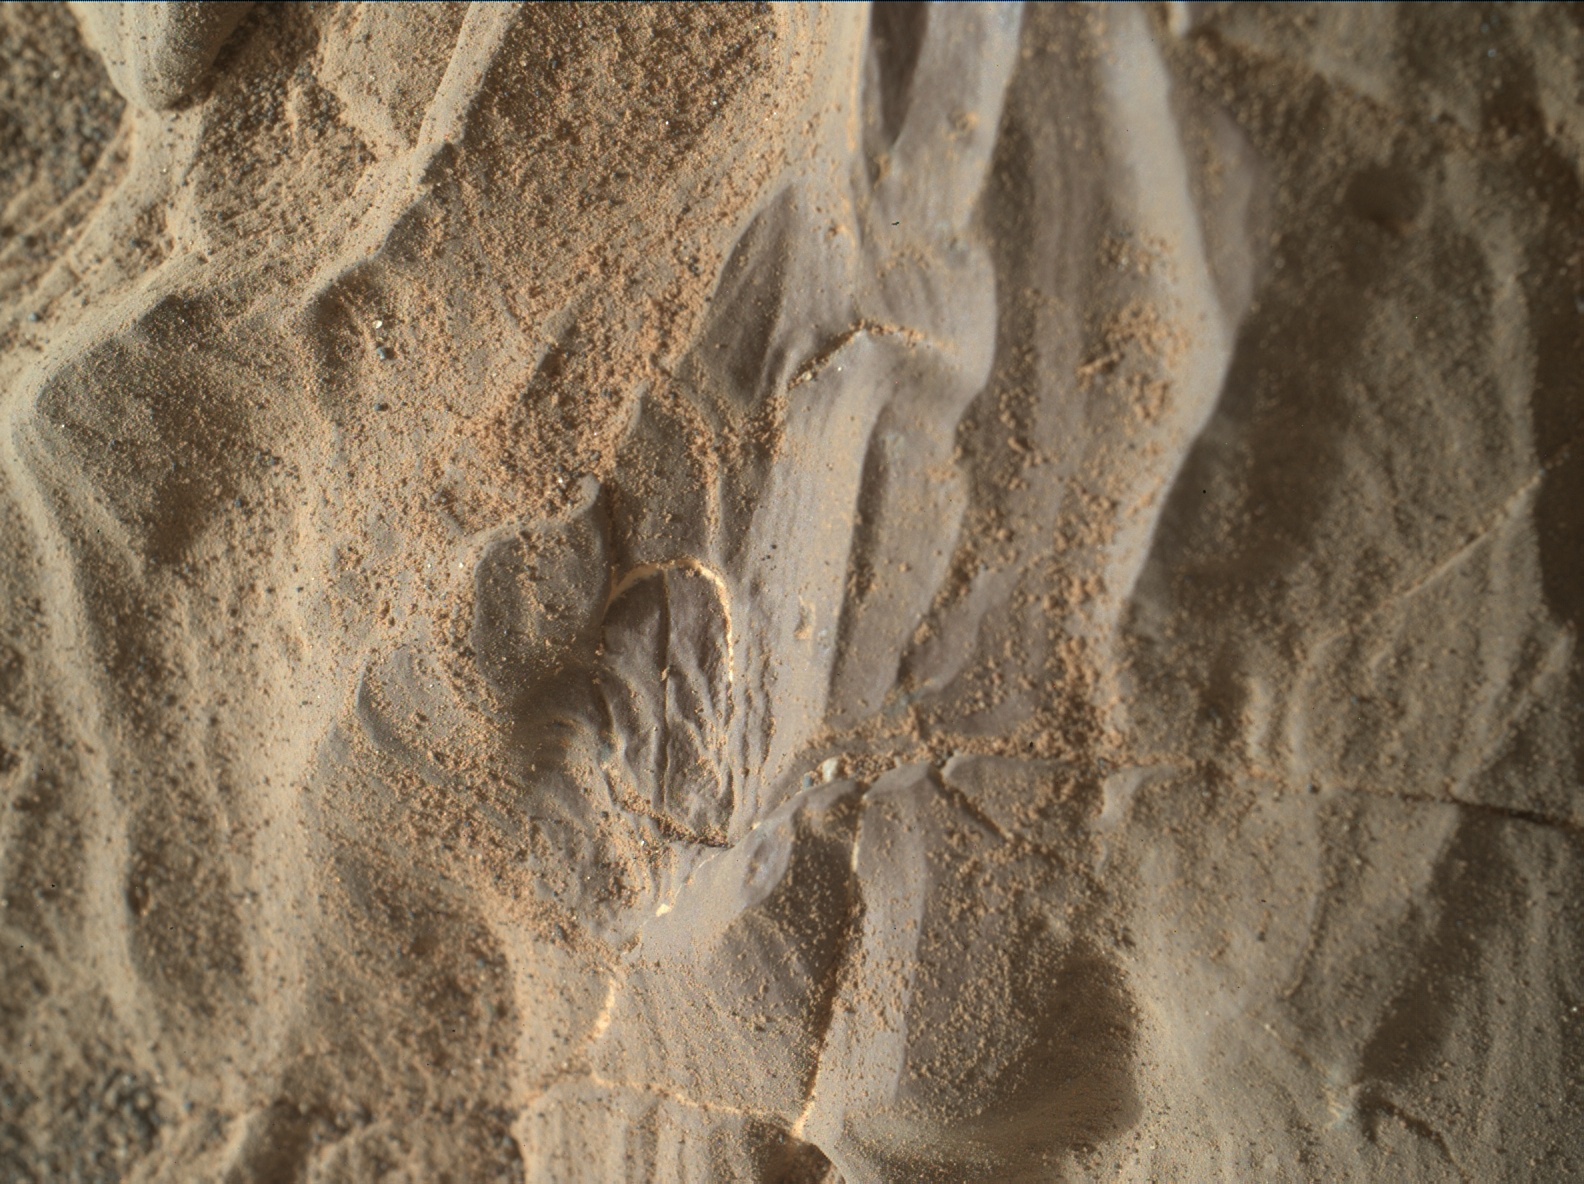 Nasa's Mars rover Curiosity acquired this image using its Mars Hand Lens Imager (MAHLI) on Sol 1988